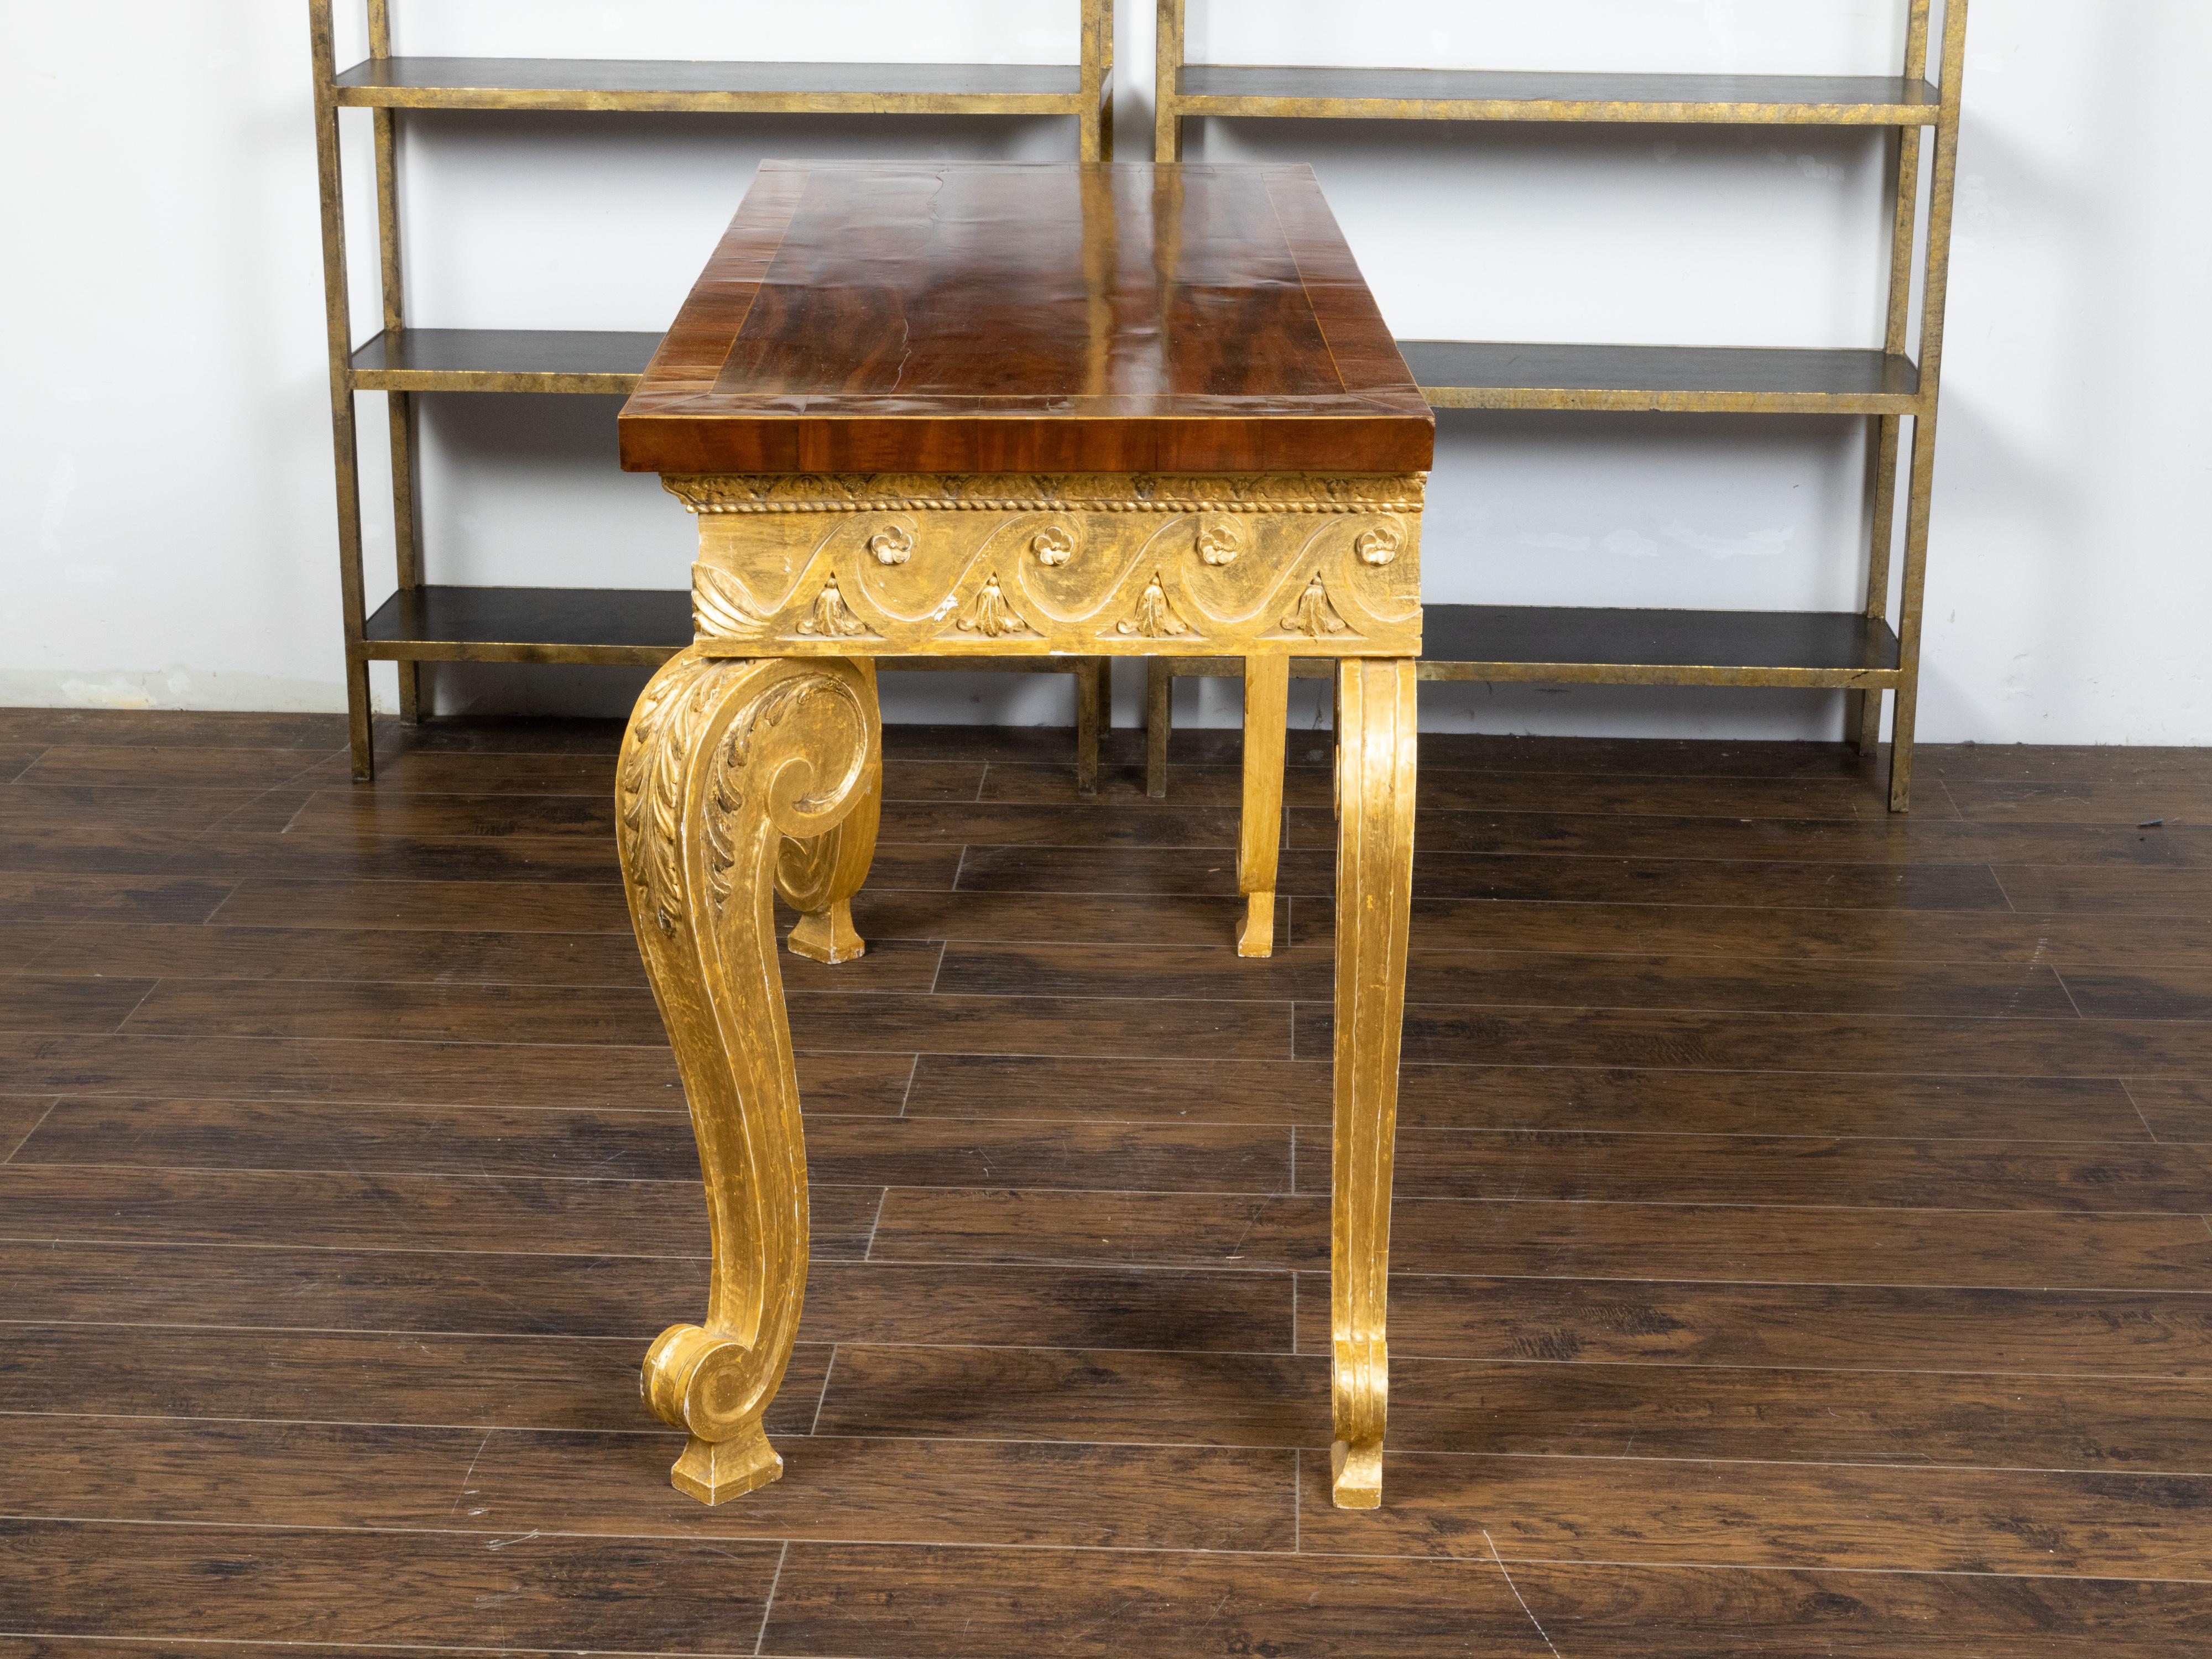 English 1800s Giltwood Console Table with Mahogany Top and Vitruvian Scrolls For Sale 4